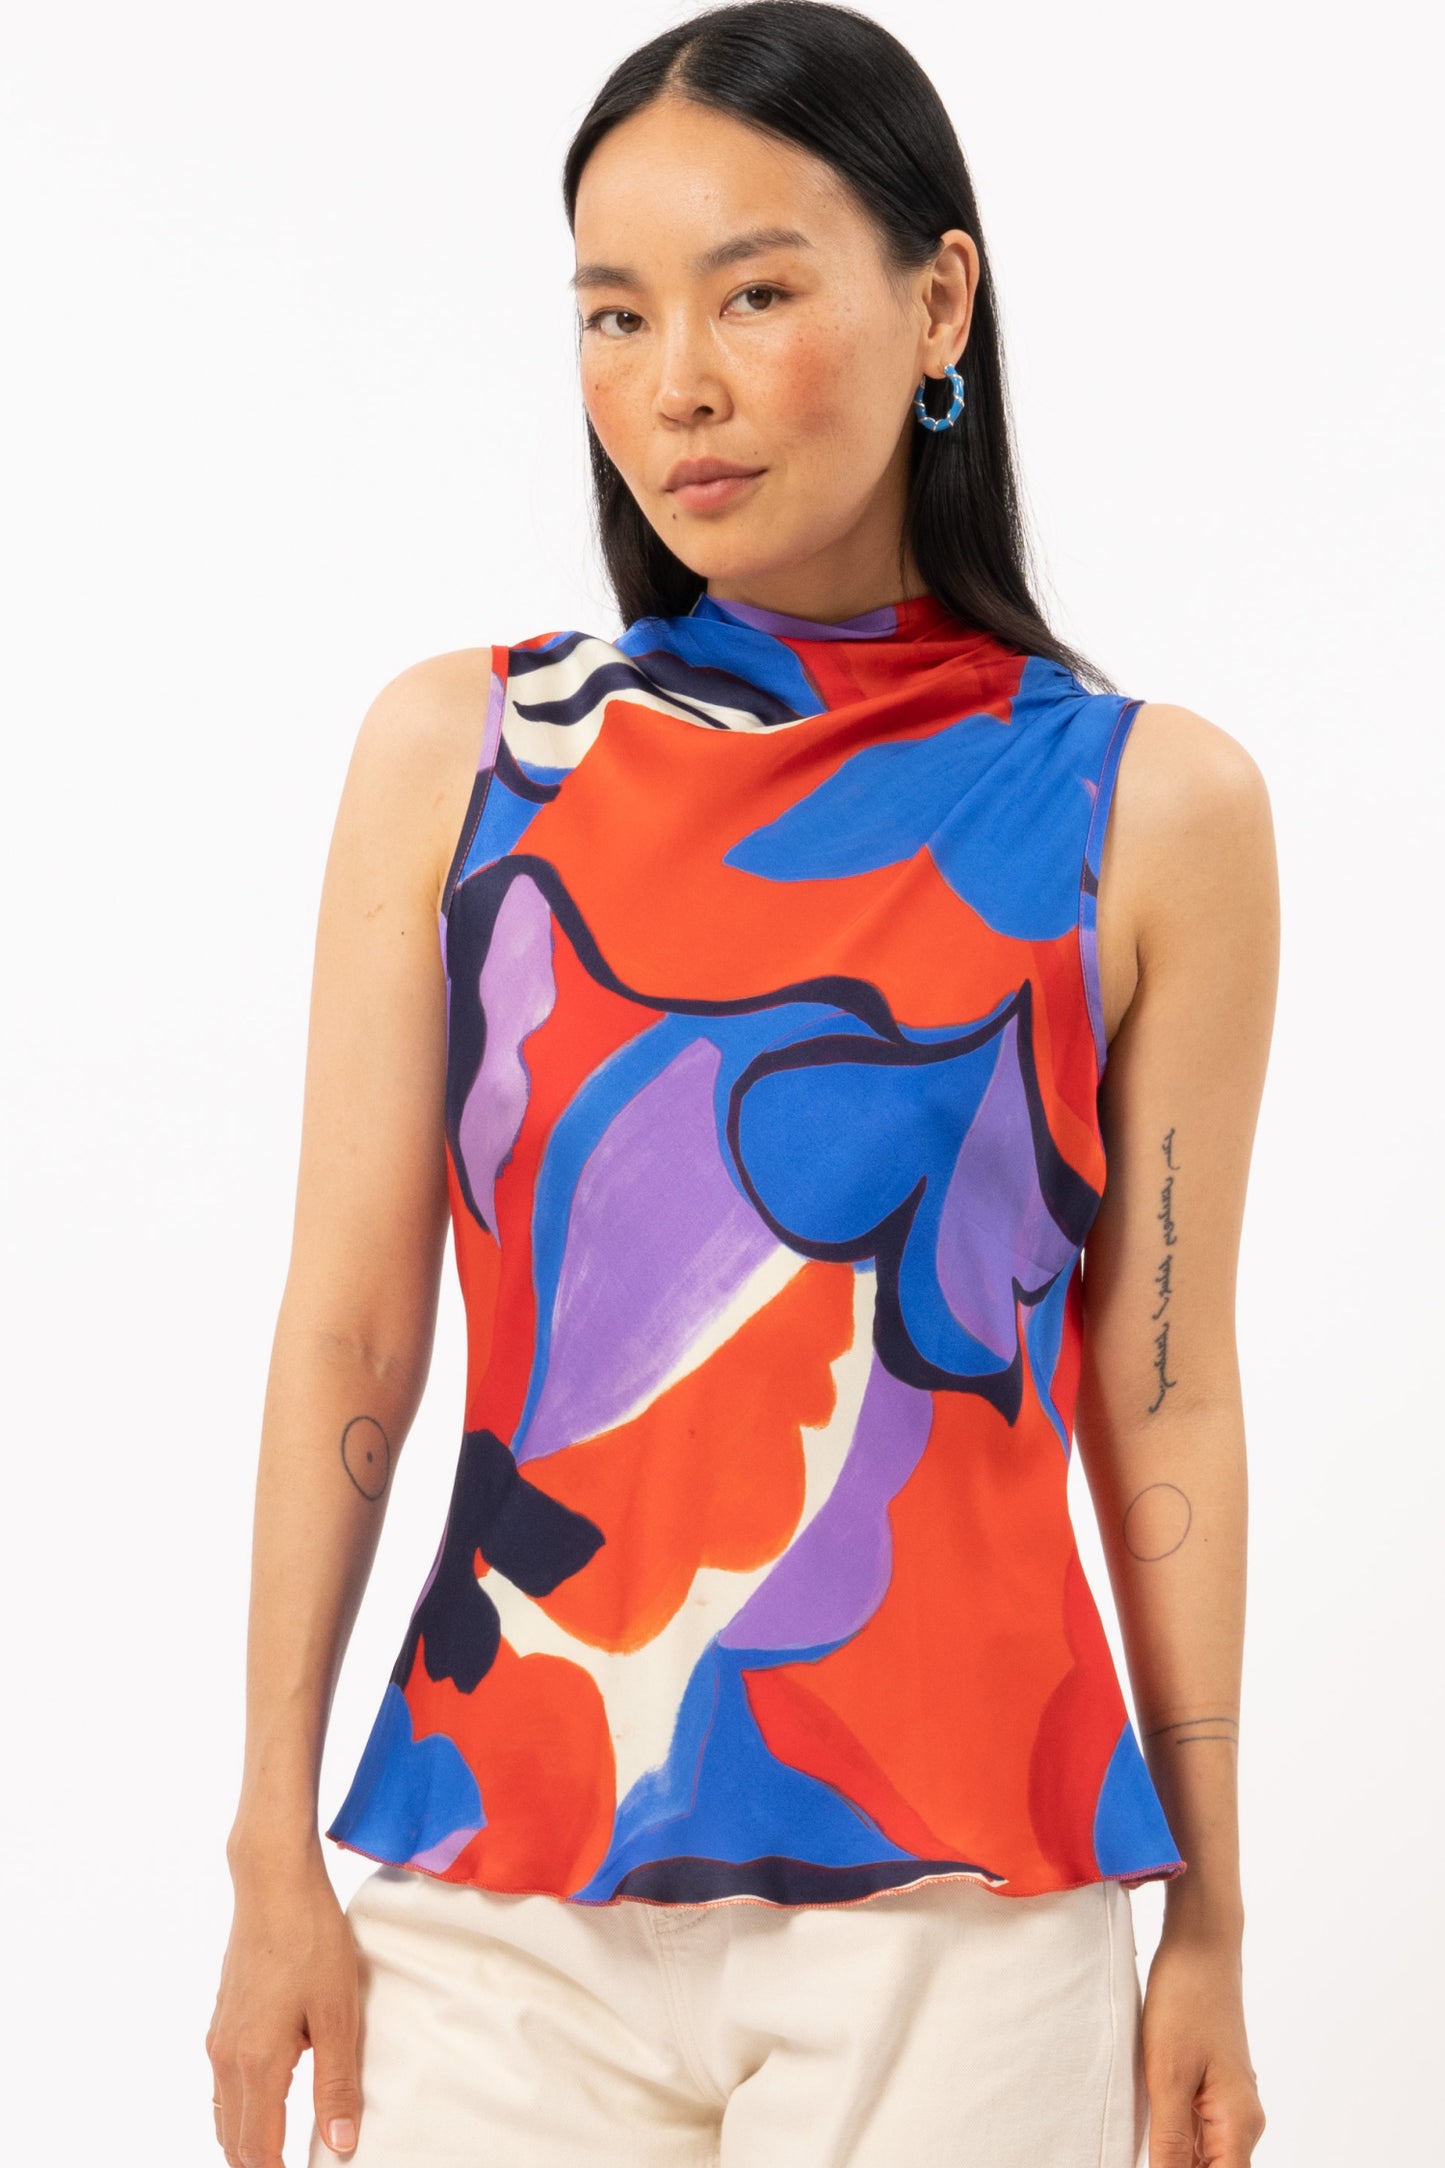 Cintia Sleeveless Printed Blouse in moving flowers by FRNCH